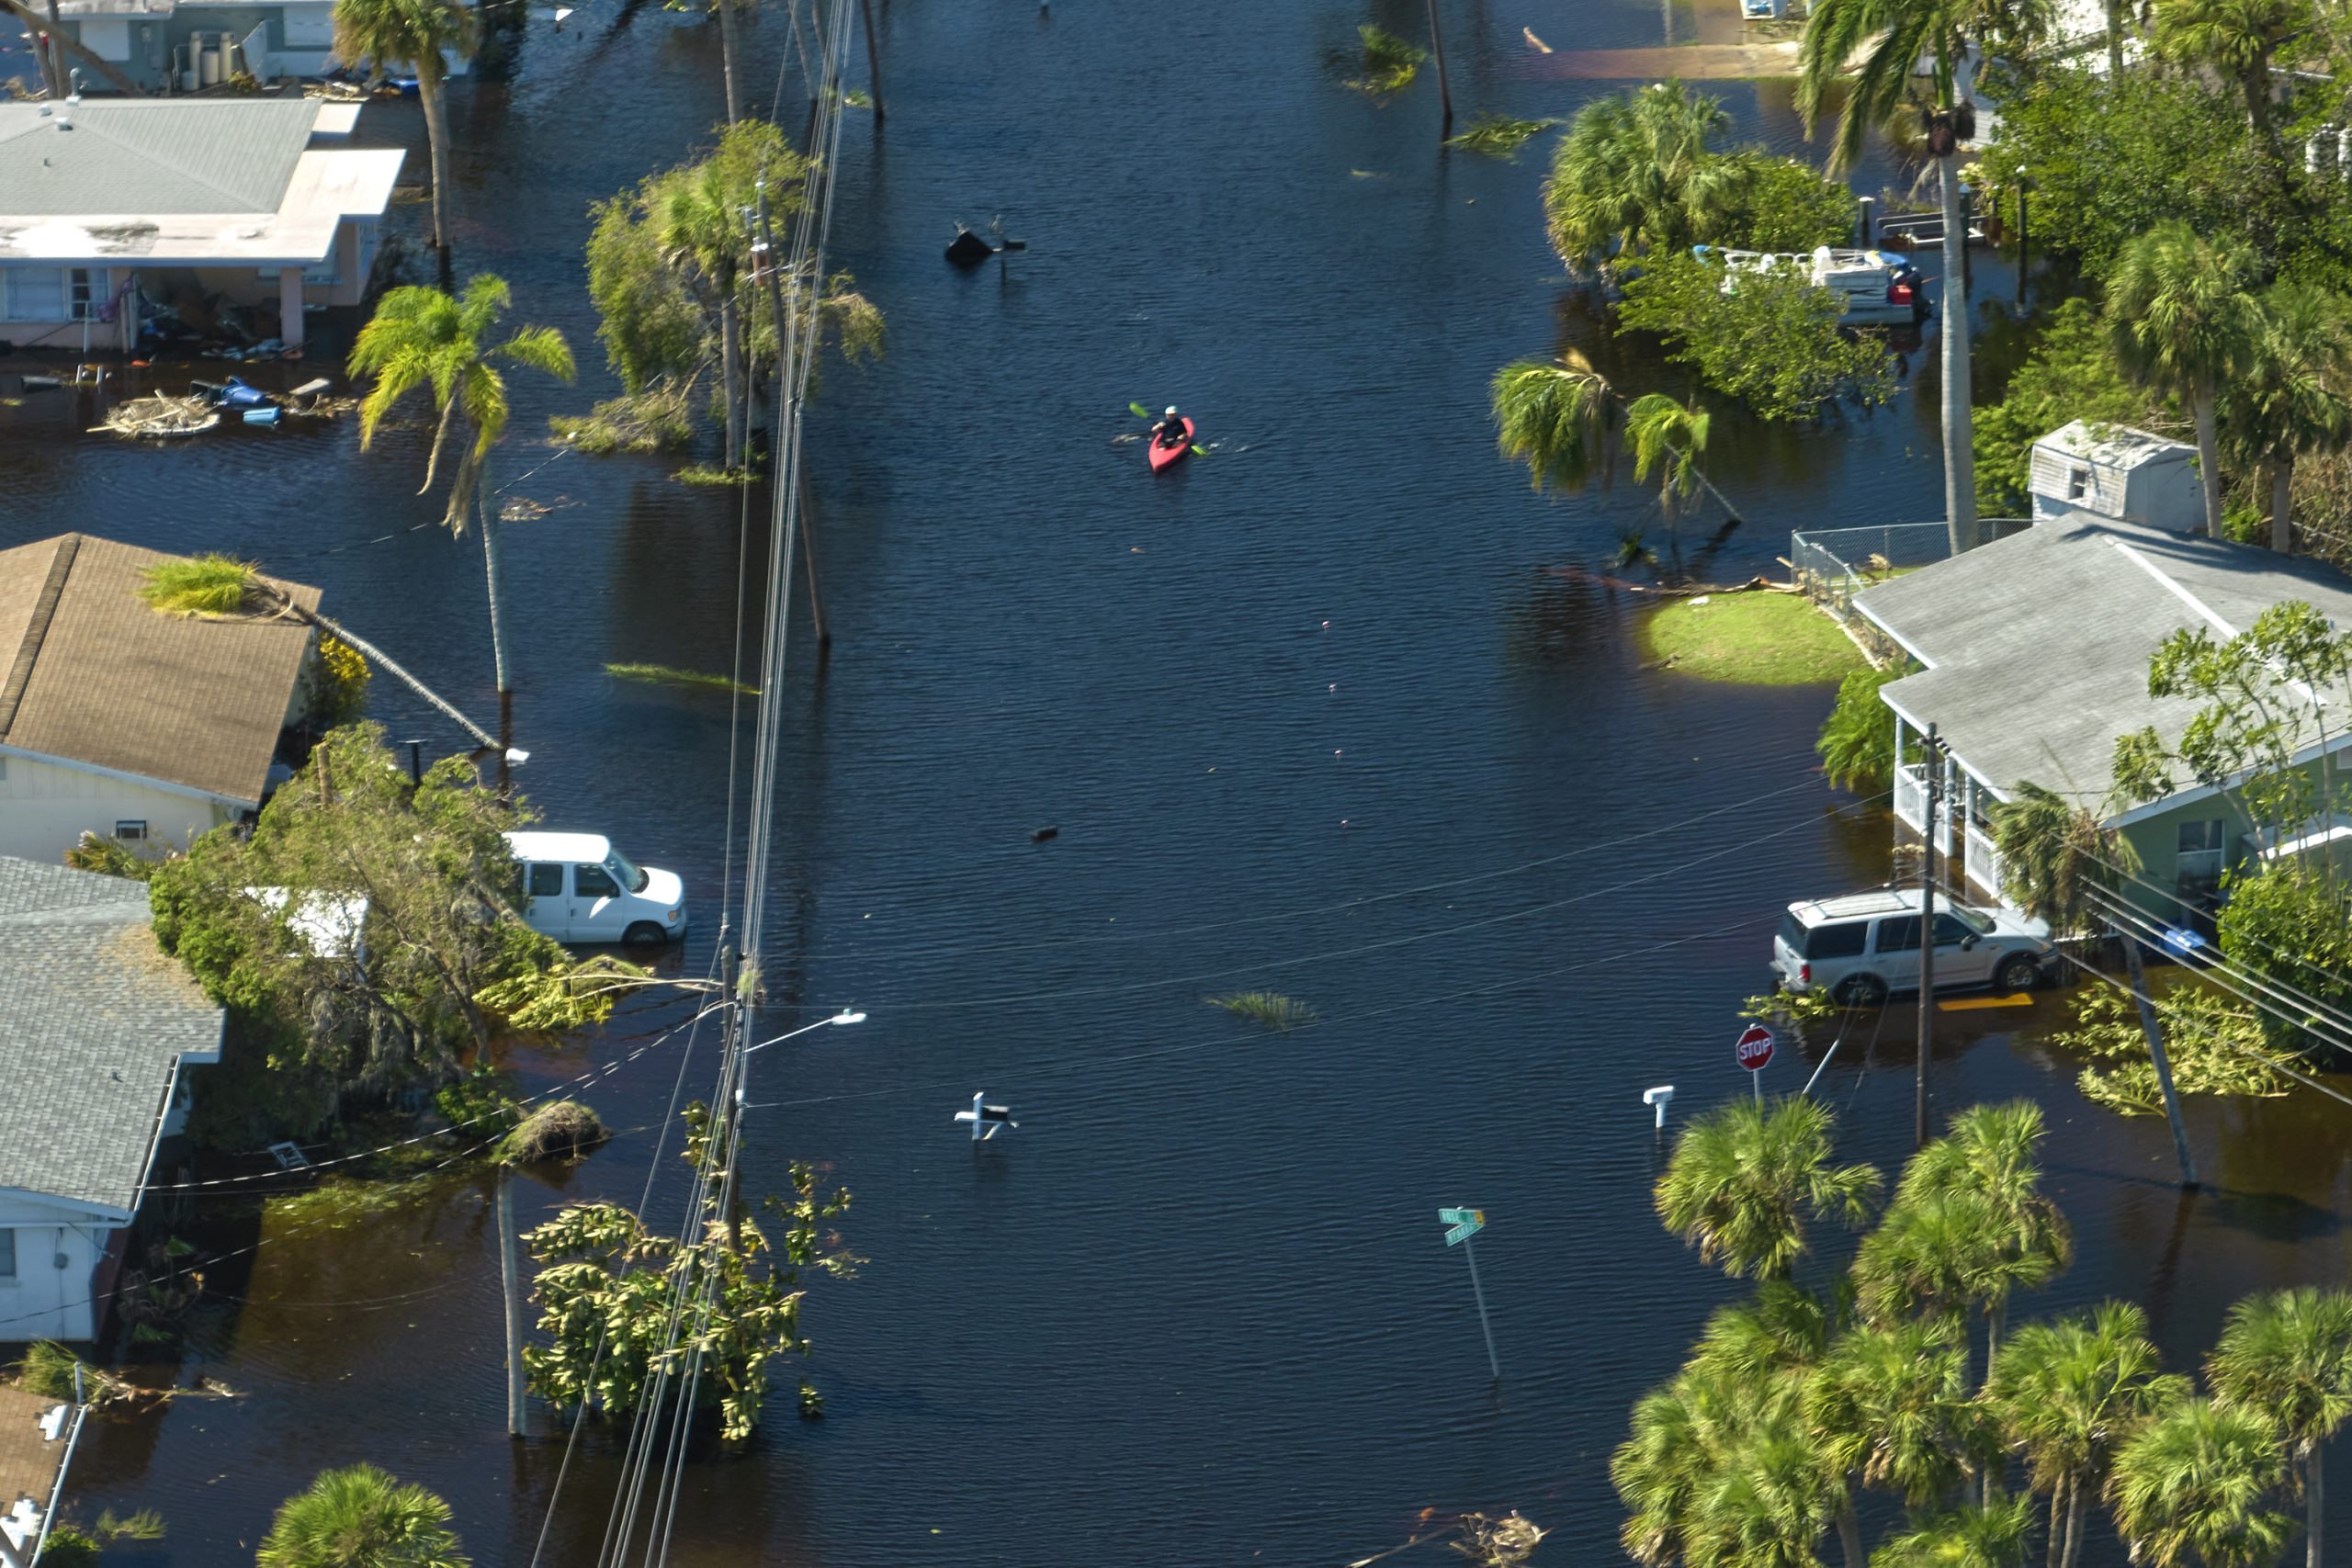 Two people in a kayak row down a flooded street, with trees and houses lining either side.